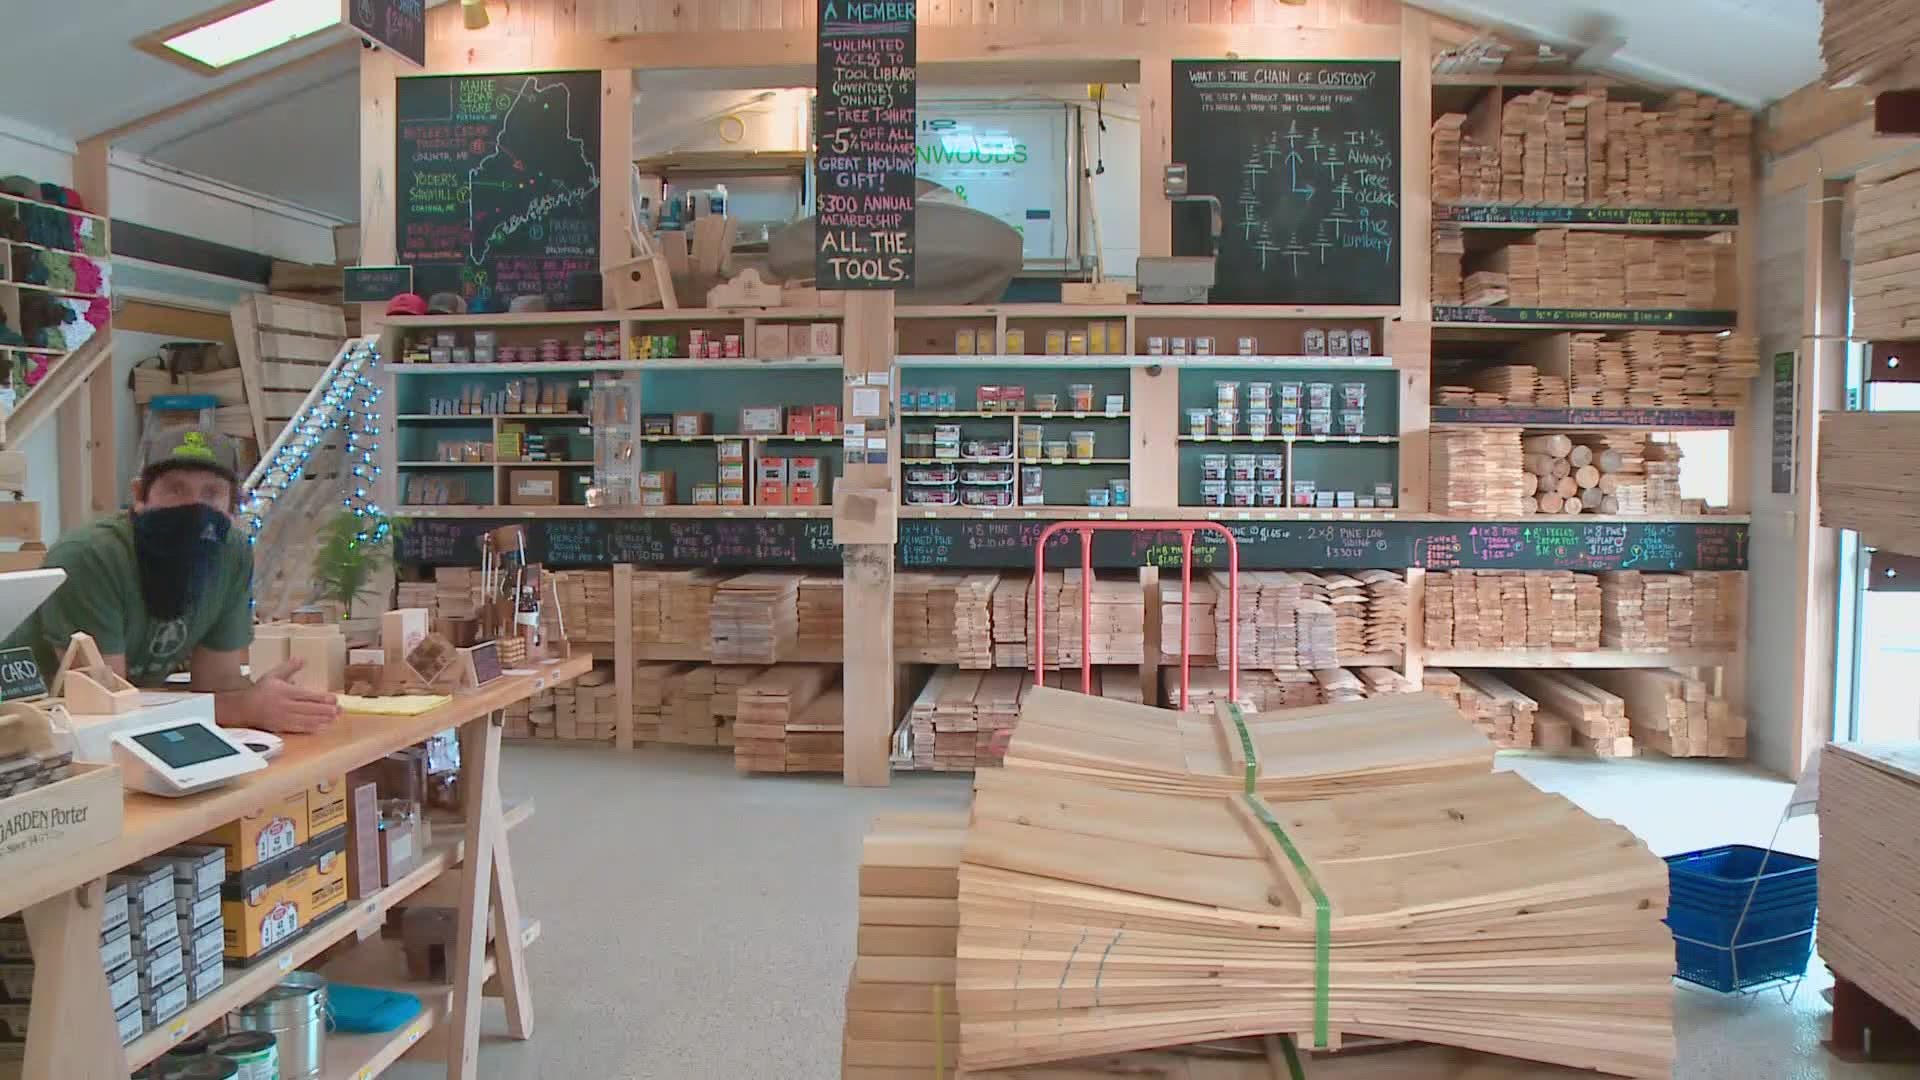 A new business in Cape Elizabeth opened its doors.